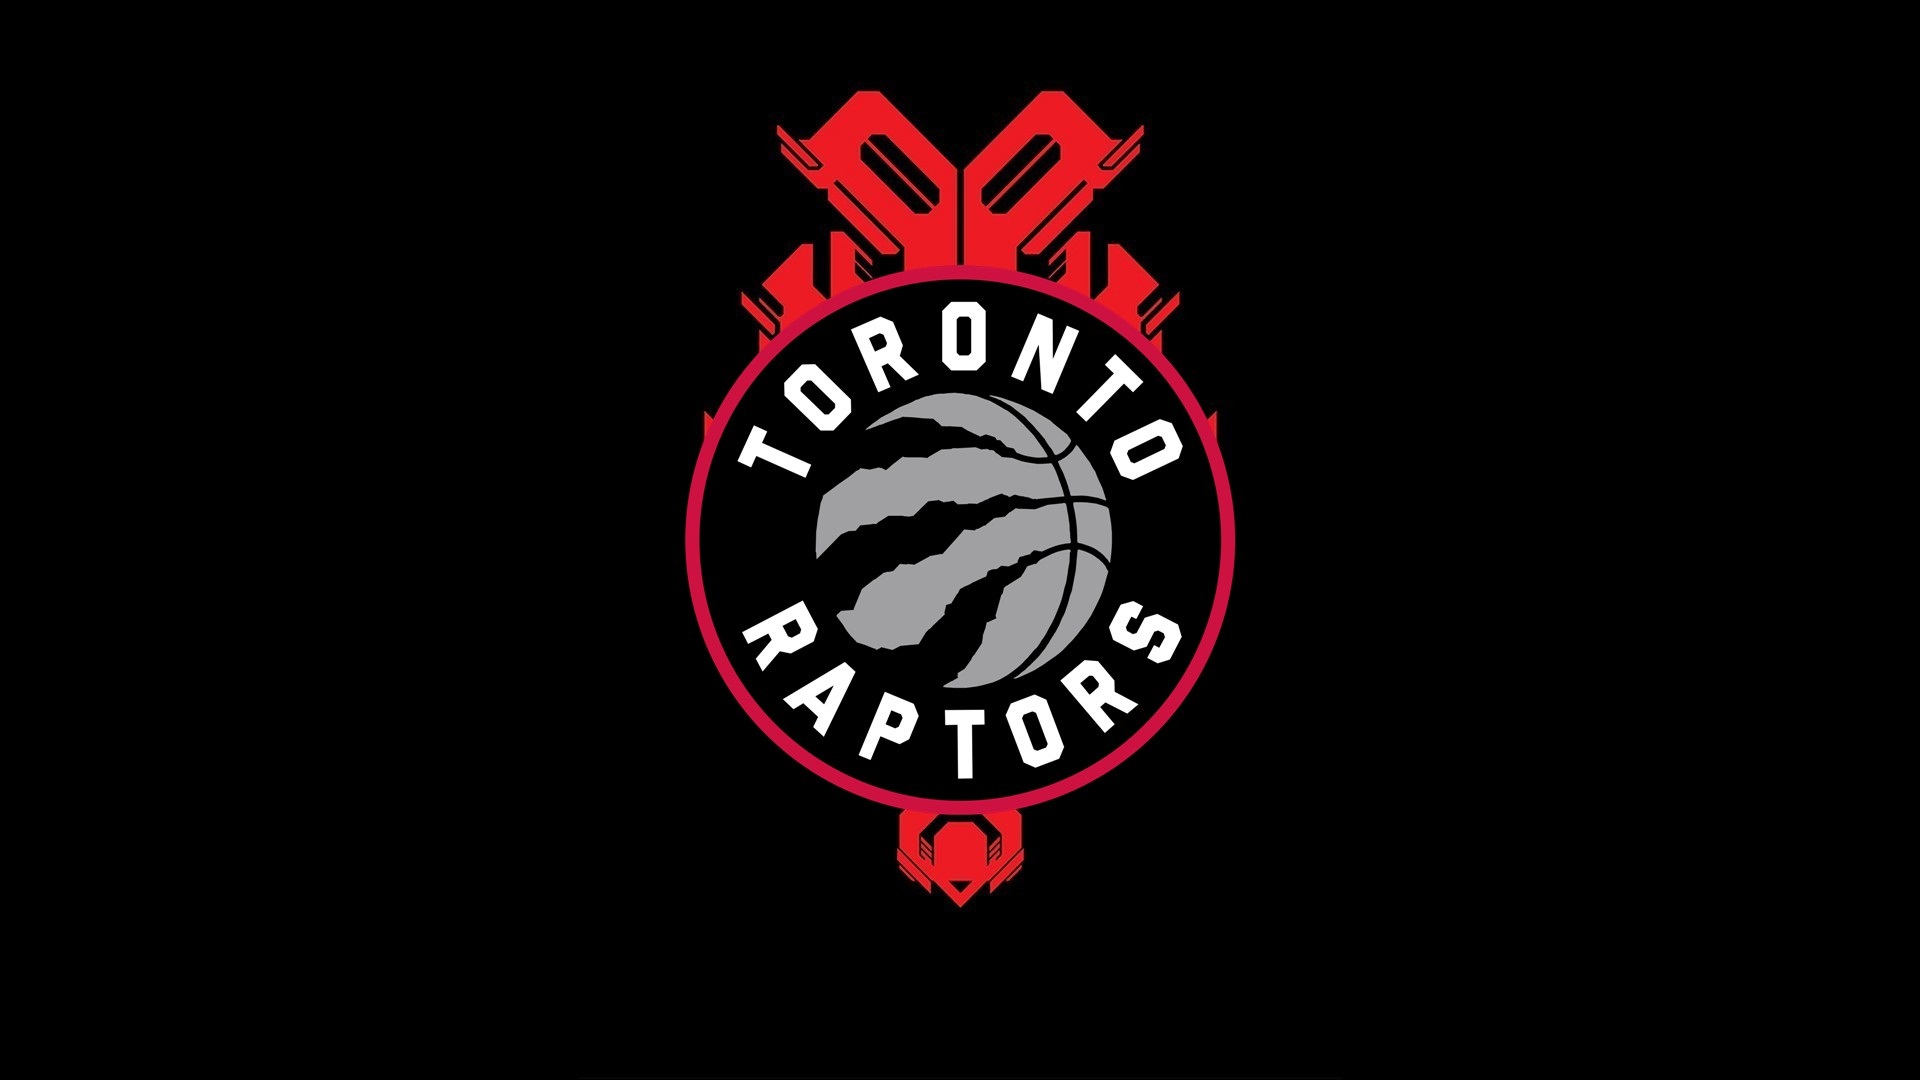 Toronto Raptors Background Wallpaper HD With Resolution 1920X1080 pixel. You can make this wallpaper for your Desktop Computer Backgrounds, Mac Wallpapers, Android Lock screen or iPhone Screensavers